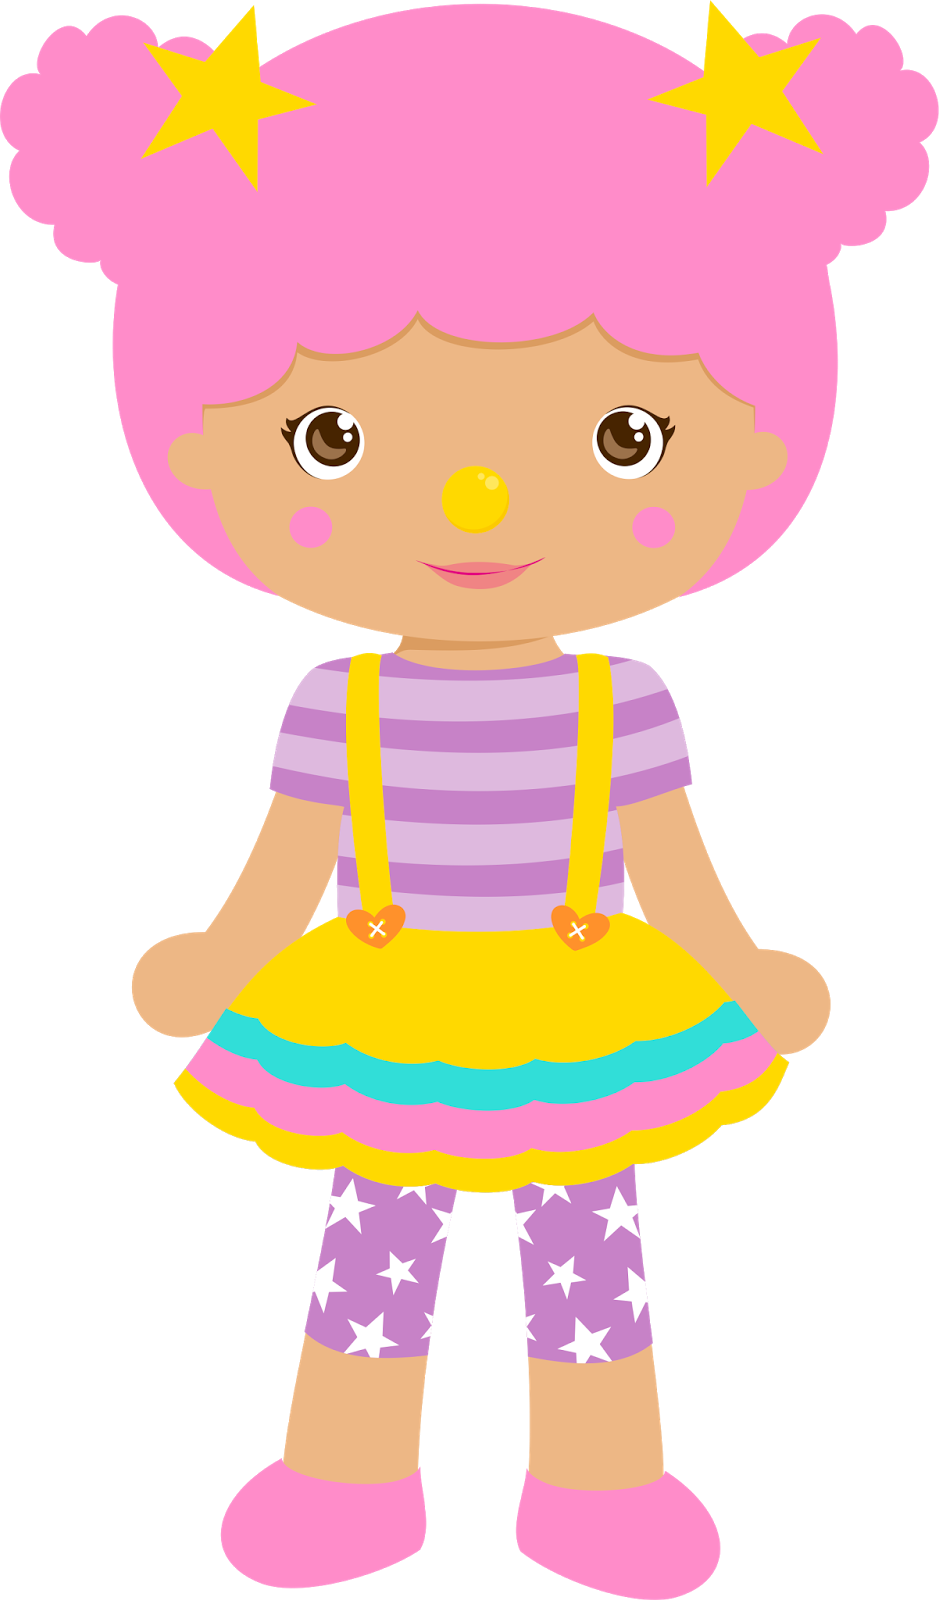 Girl Circus Clipart | Oh My Fiesta! in english